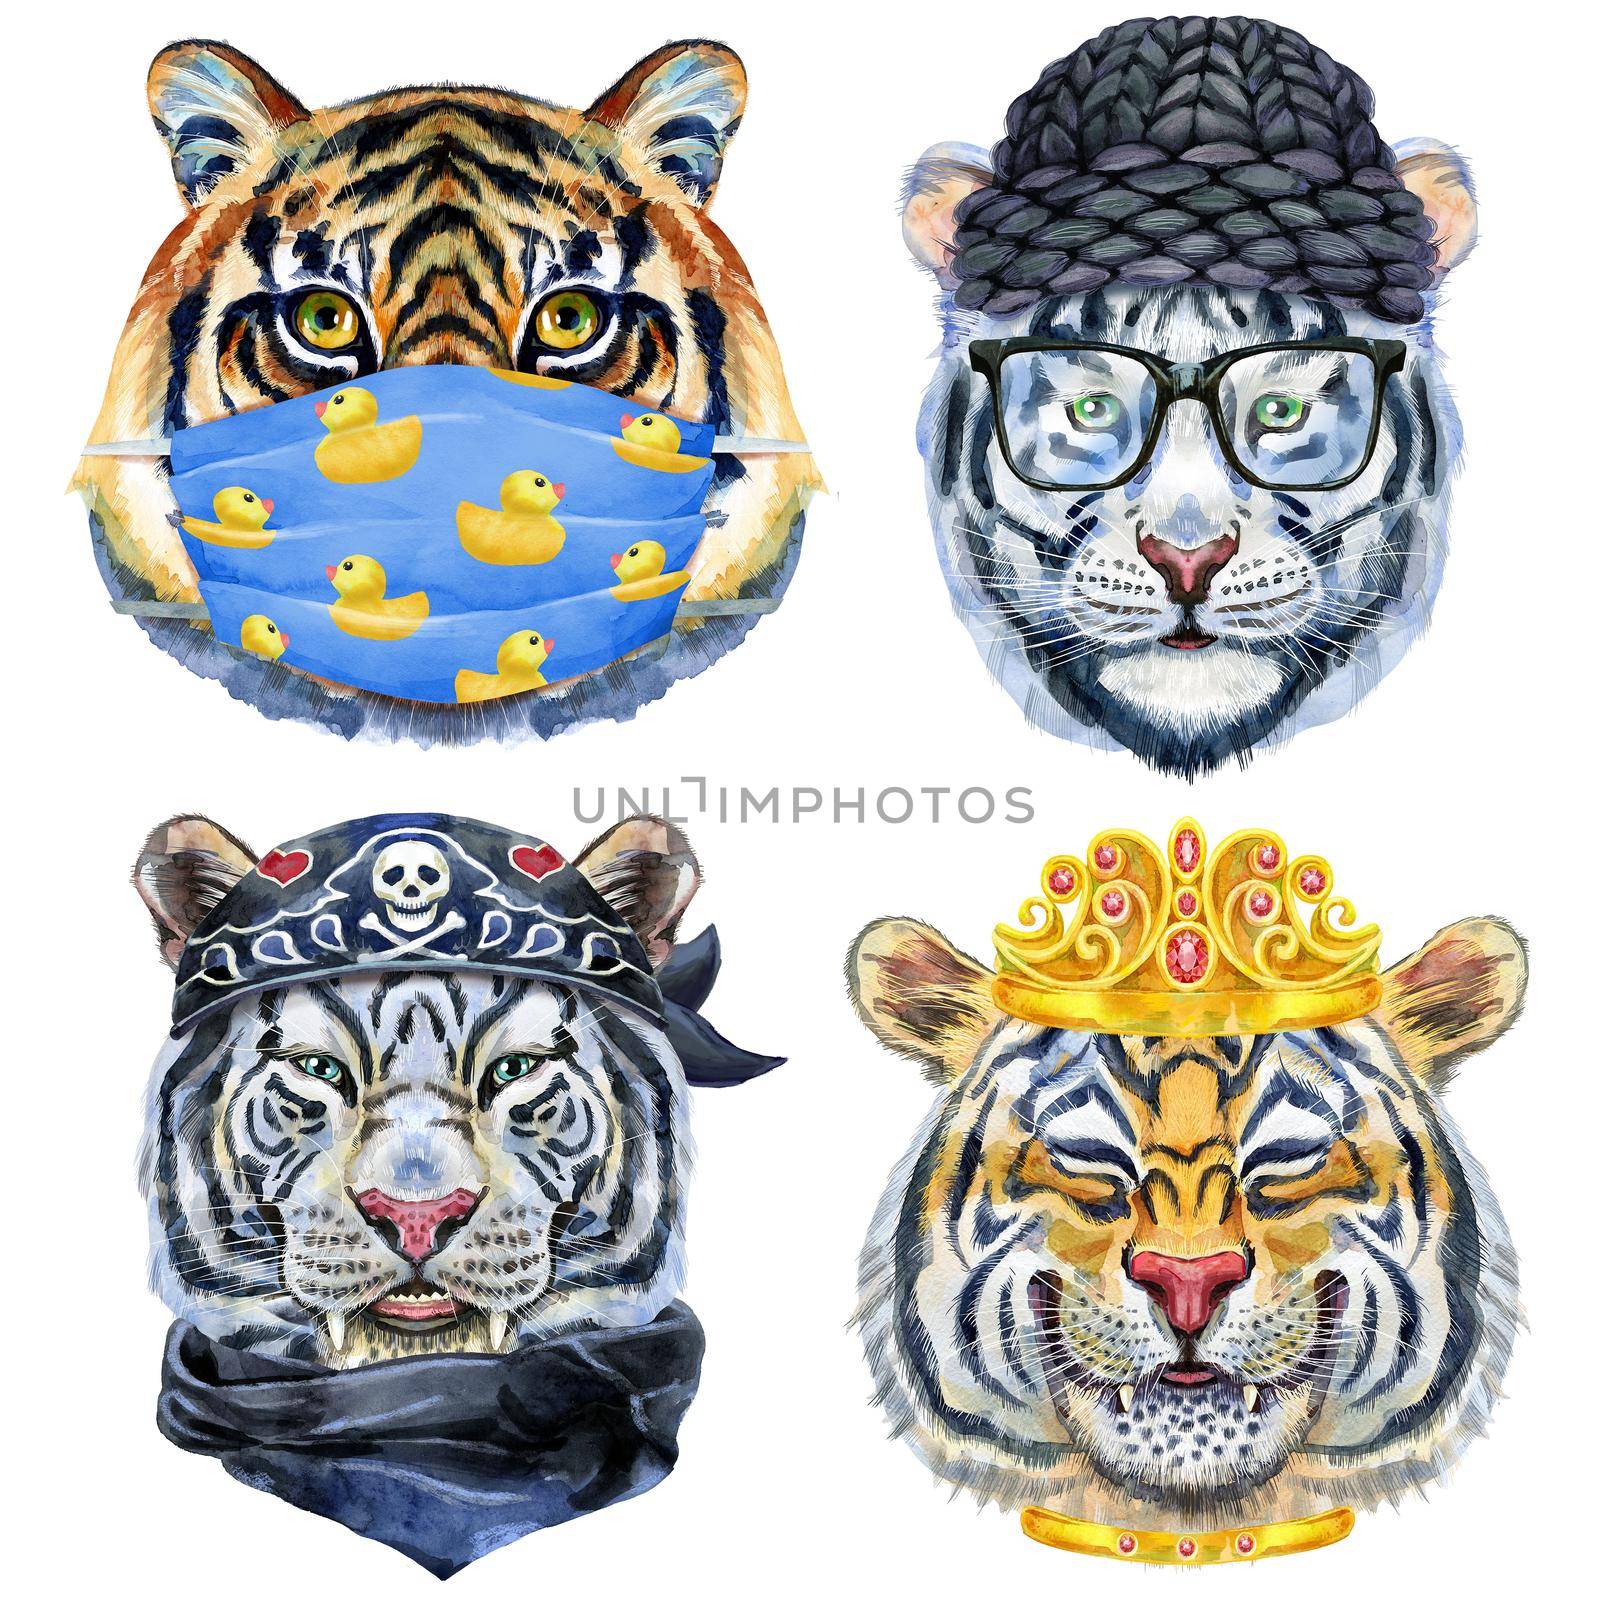 Watercolor illustration of tigers in a knitted winter hat, biker bandana, medical mask and a golden crown